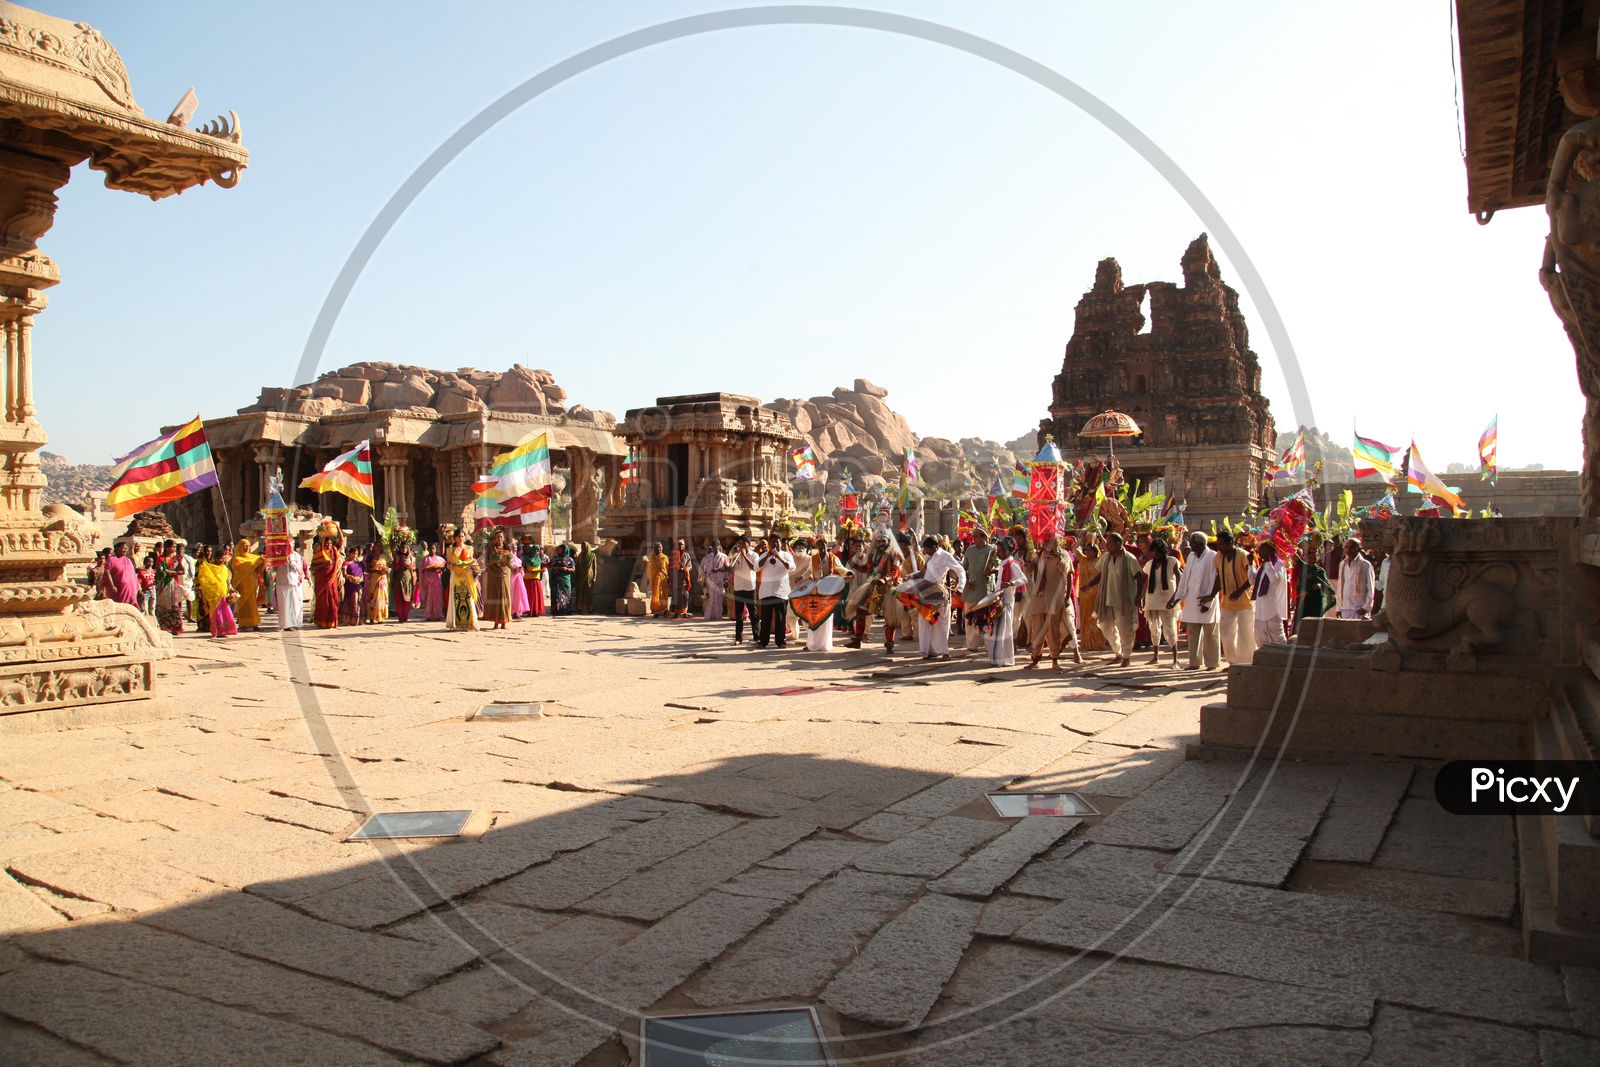 Local Festival Celebrations In a Ancient Temple